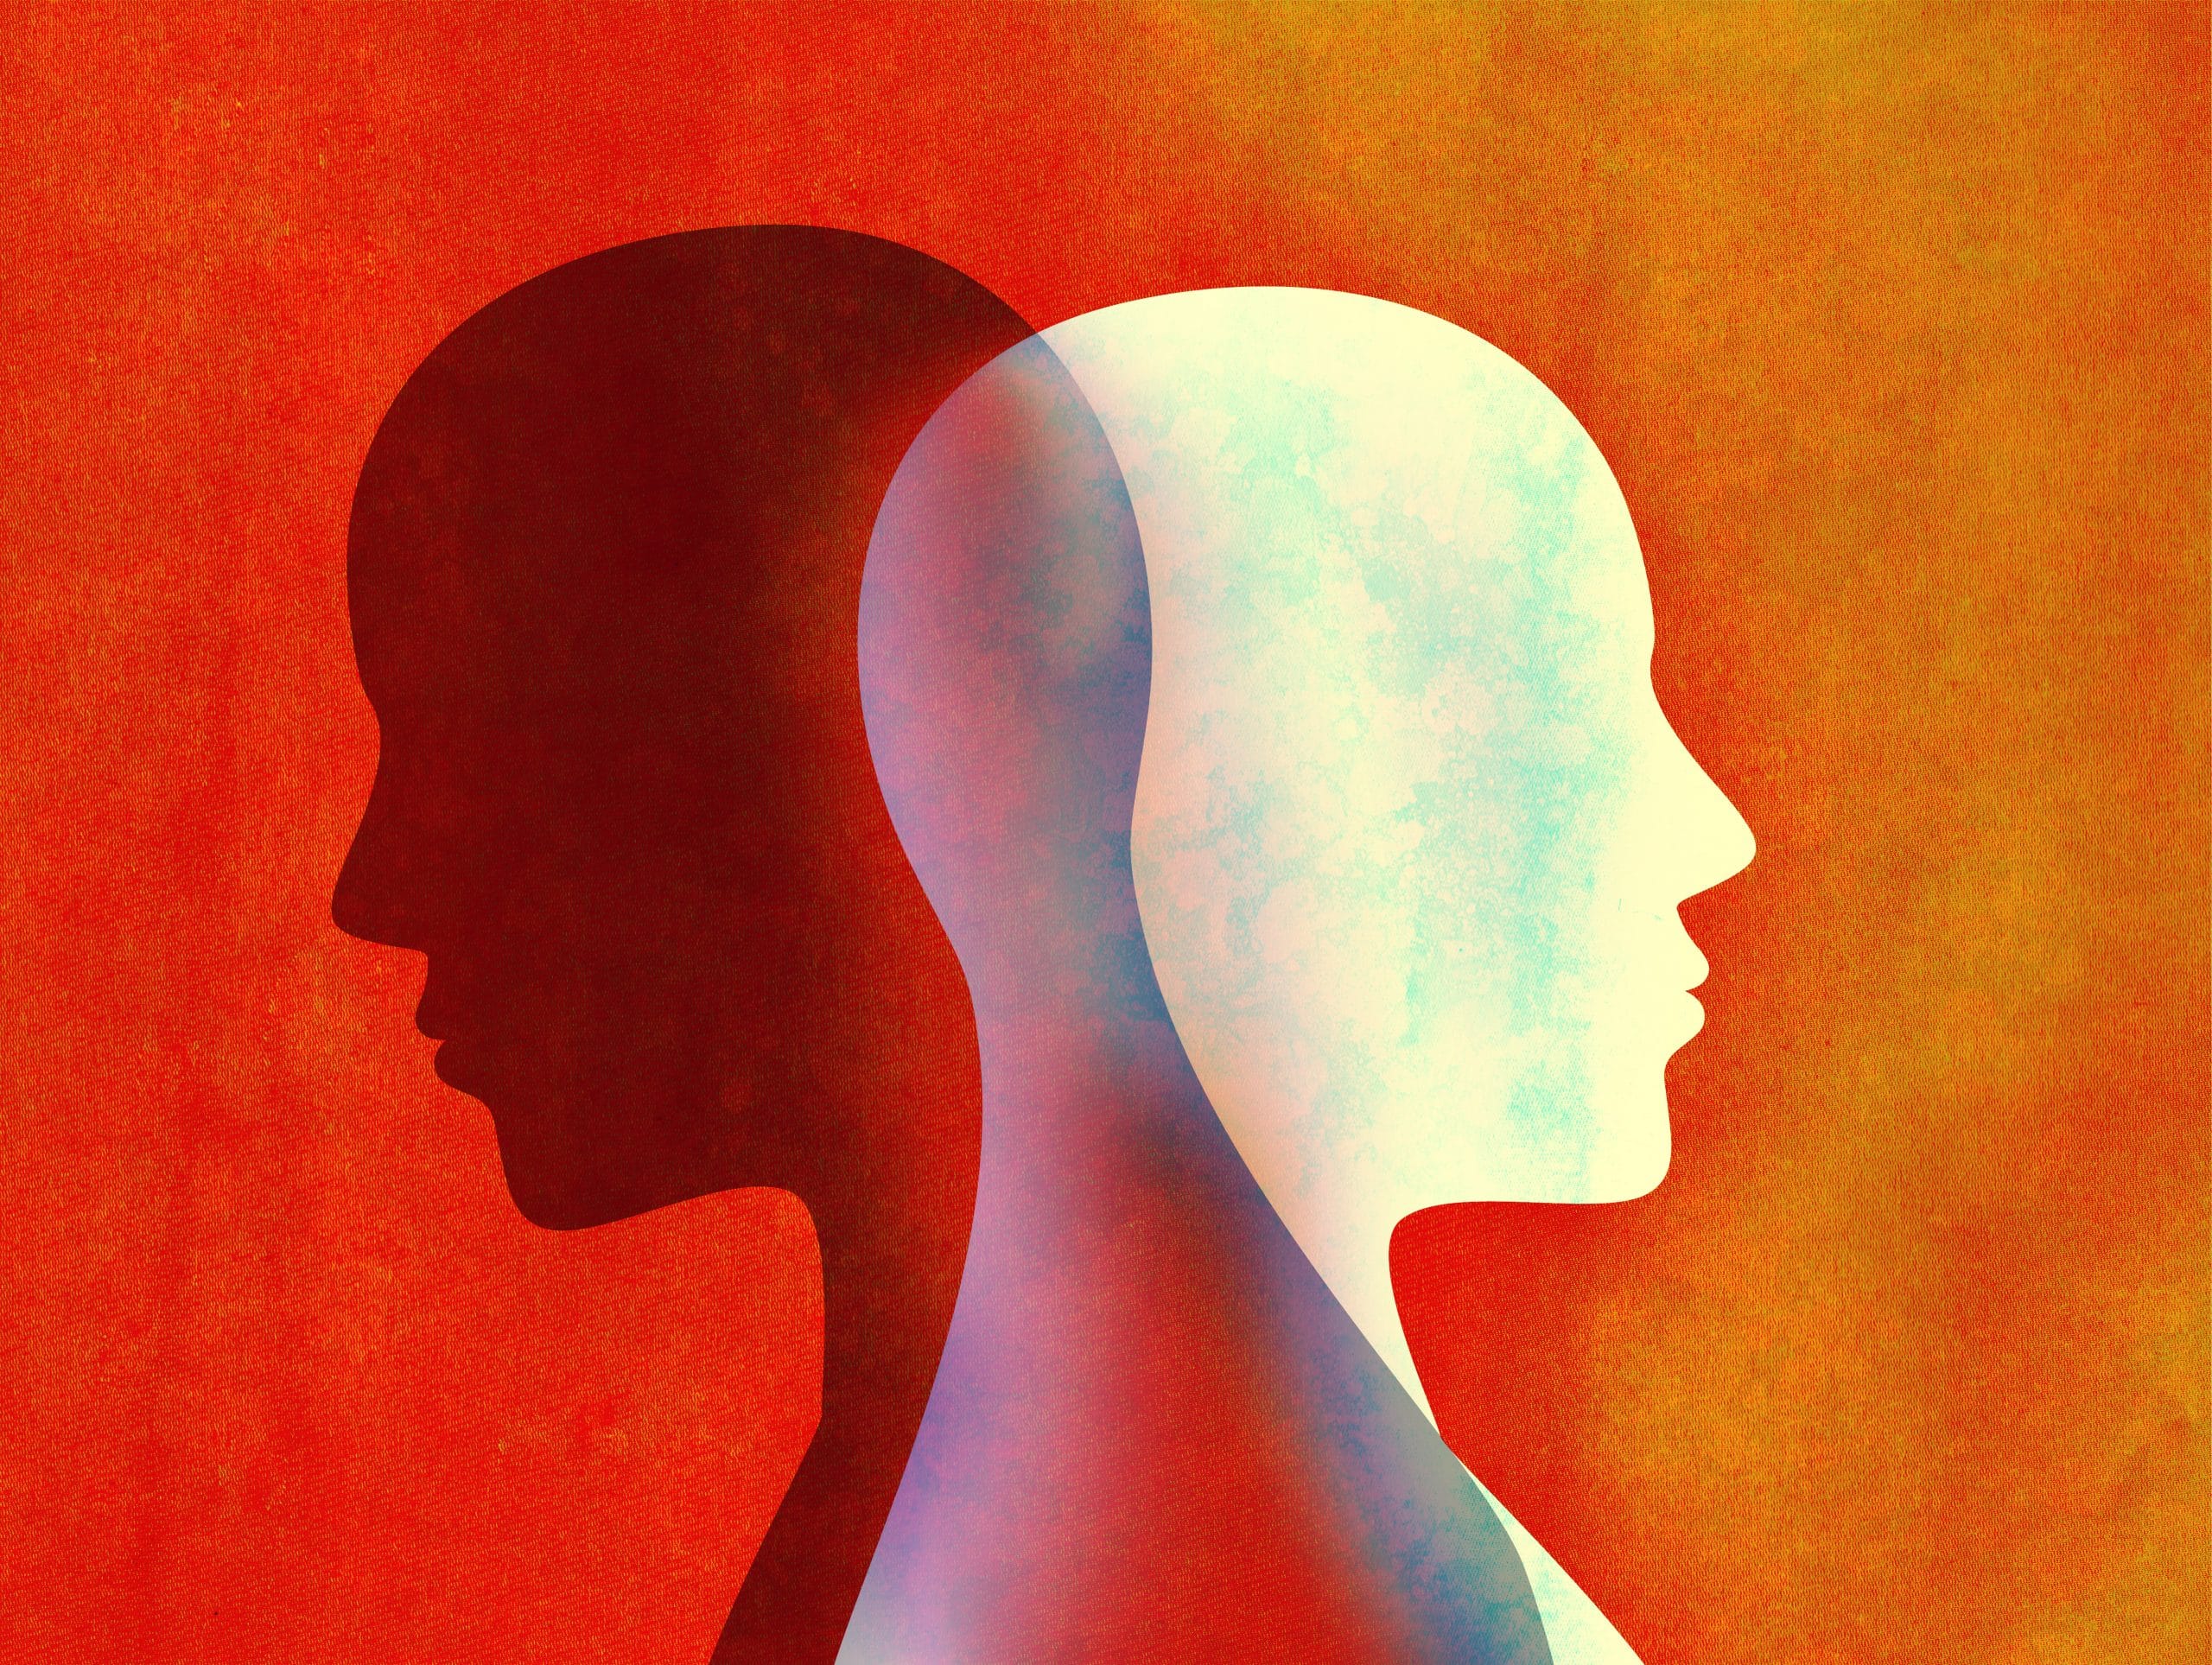 Mental health: Two heads in different colours to highlight hidden mental health. One head is dark while the other is light against an orange background 